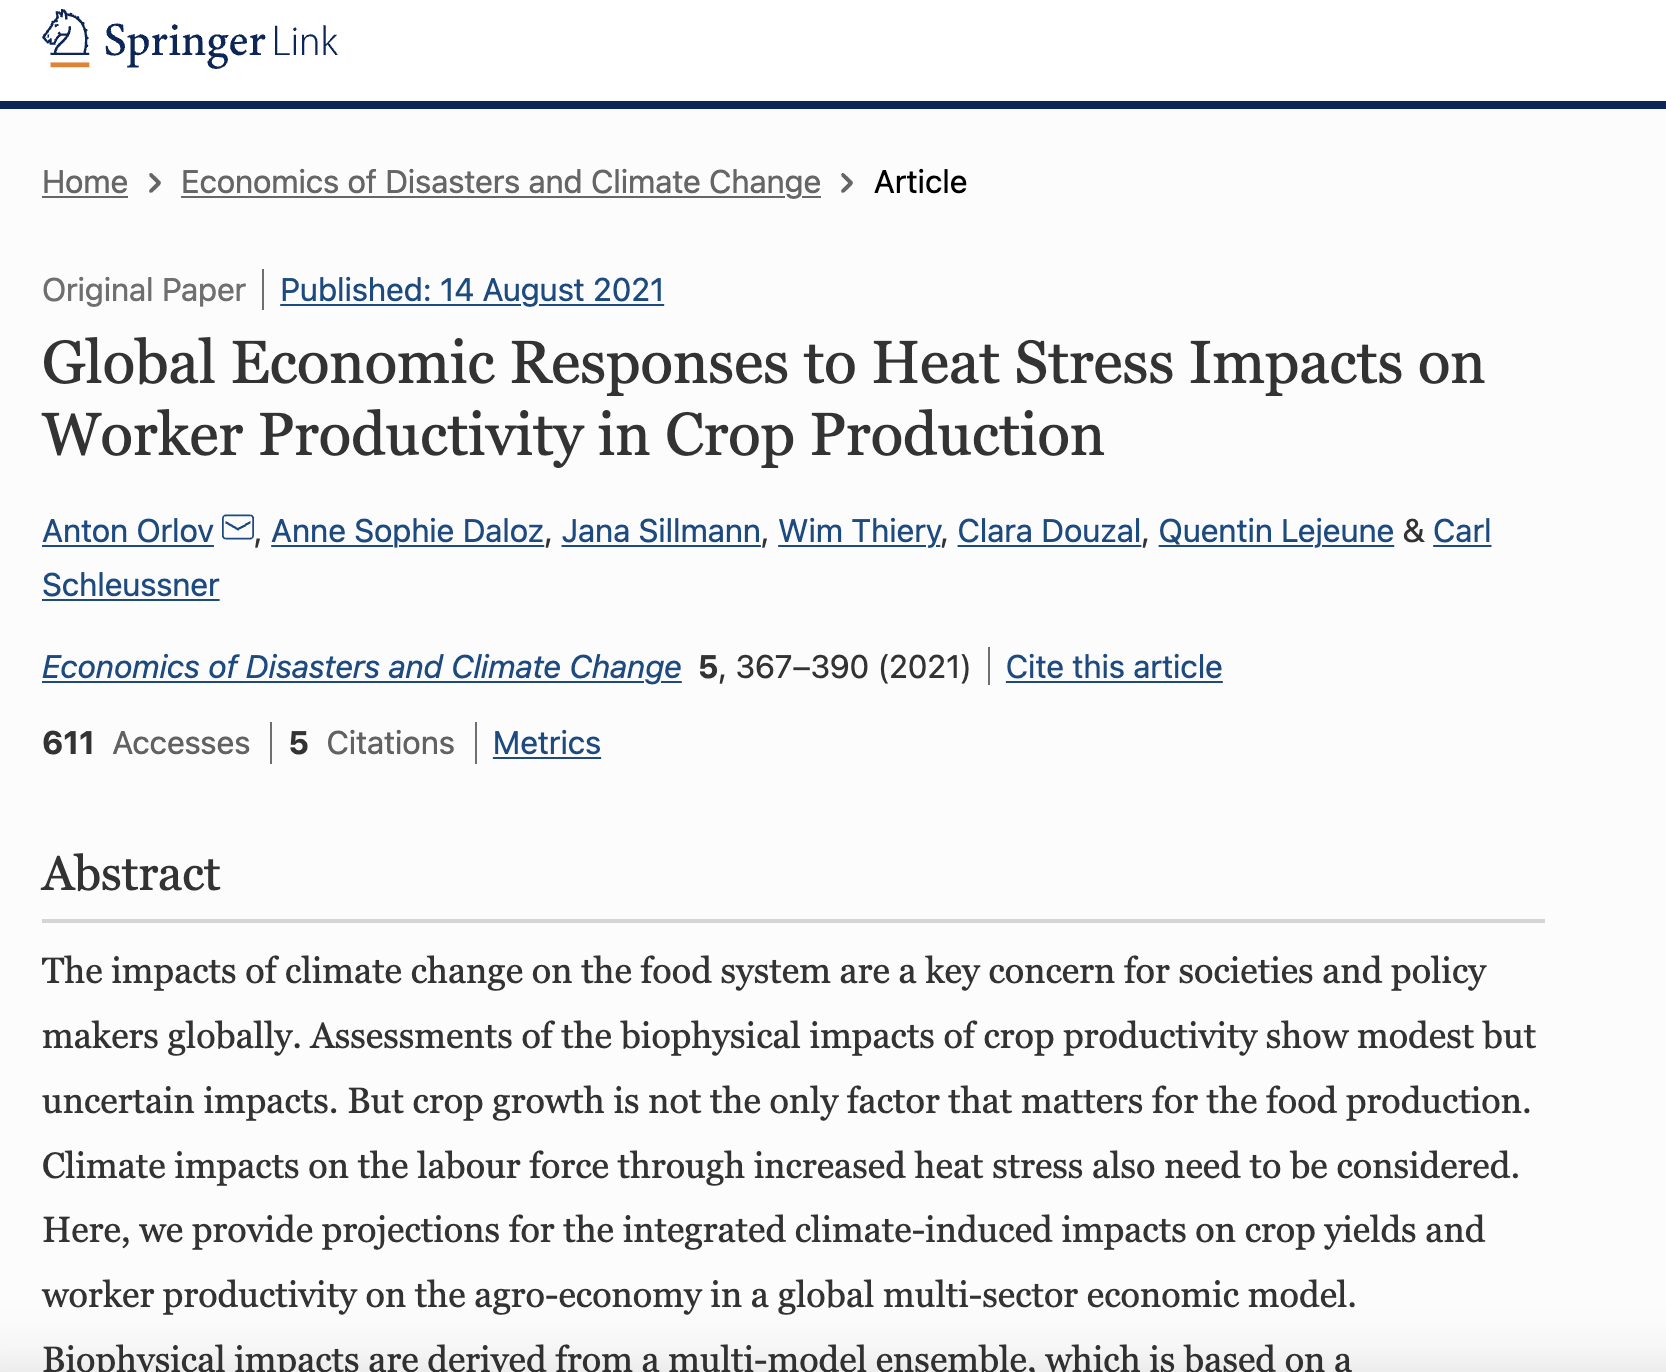 WP8 Synthesis: synergy of risks and policy implications- Global Economic Responses to Heat Stress Impacts on Worker Productivity in Crop Production